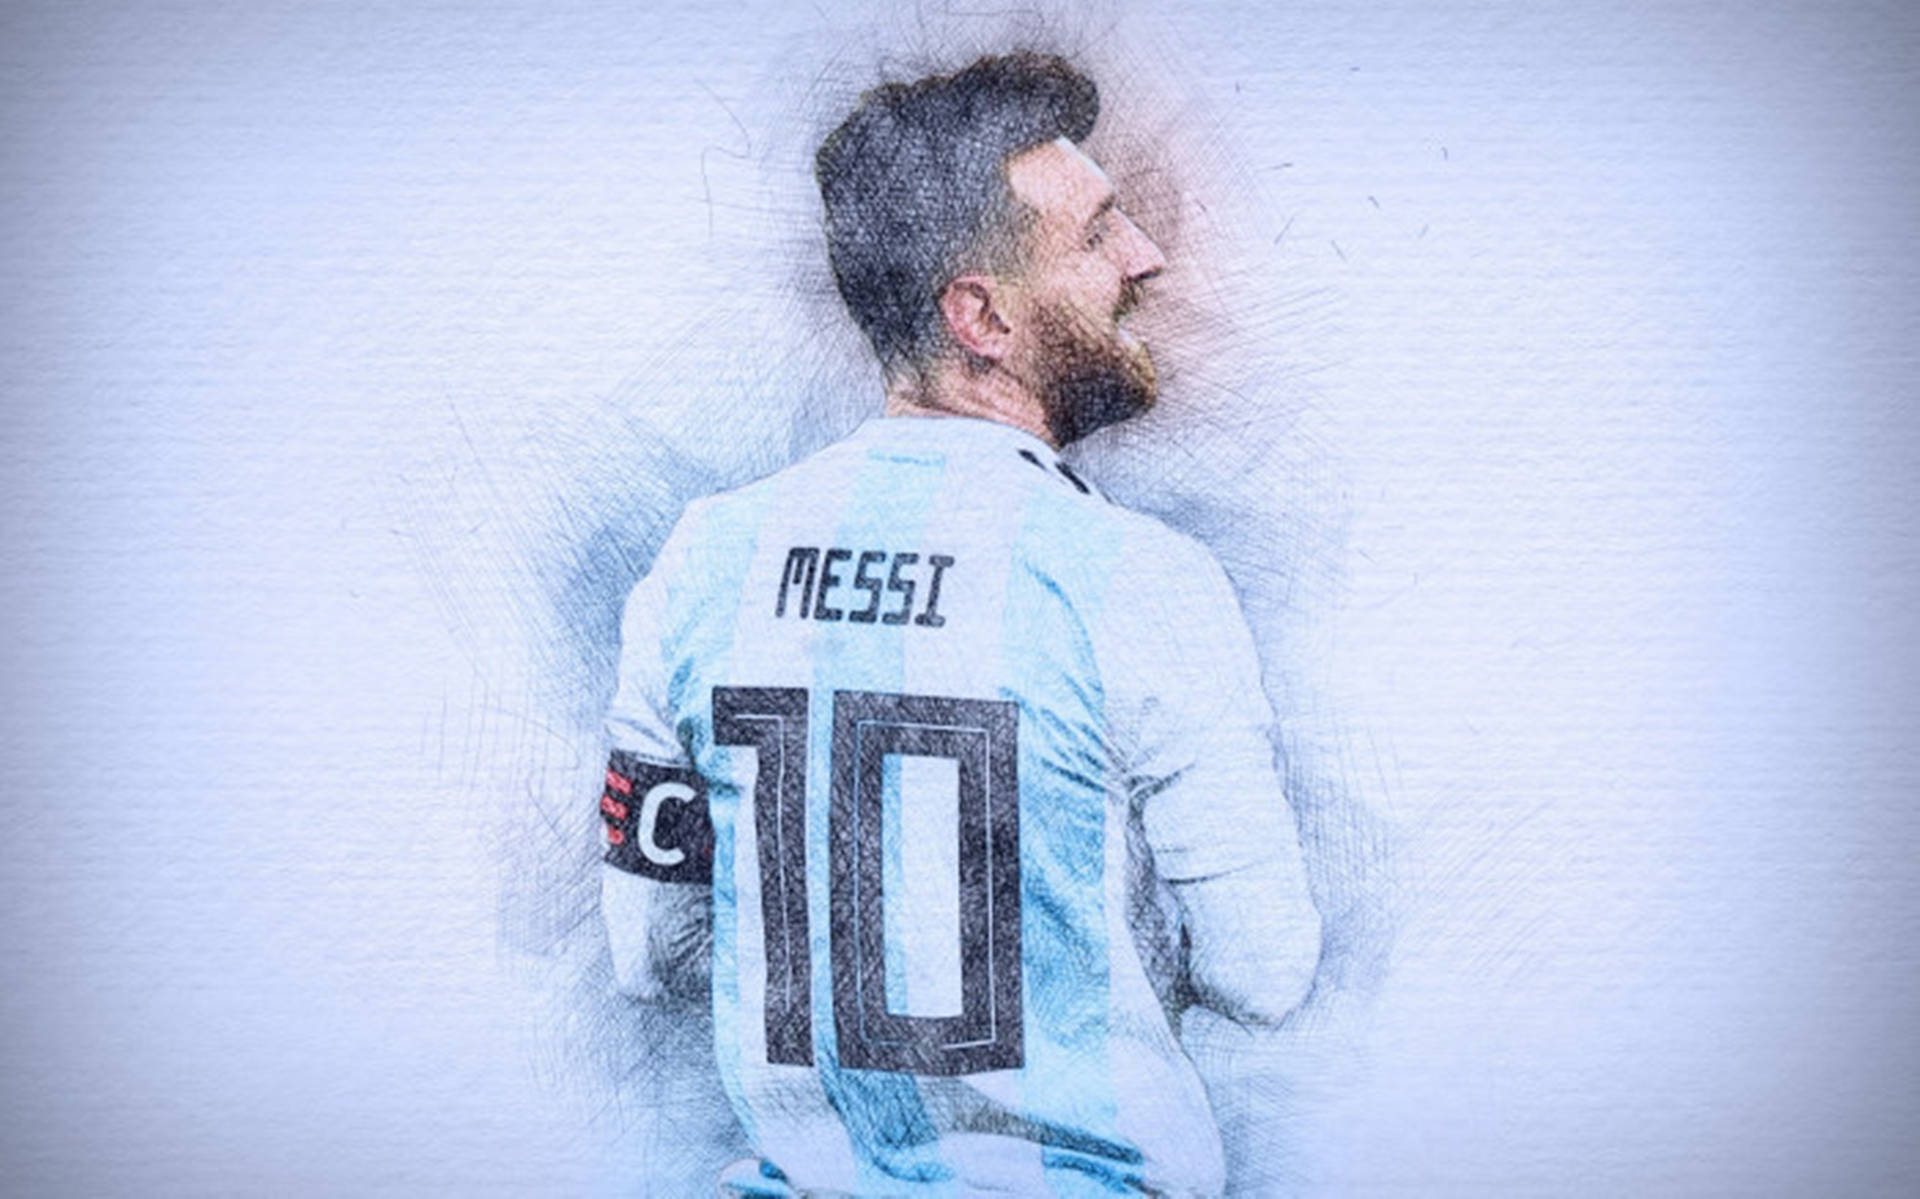 Lionel Messi Drawing Tutorial - How to draw Lionel Messi step by step